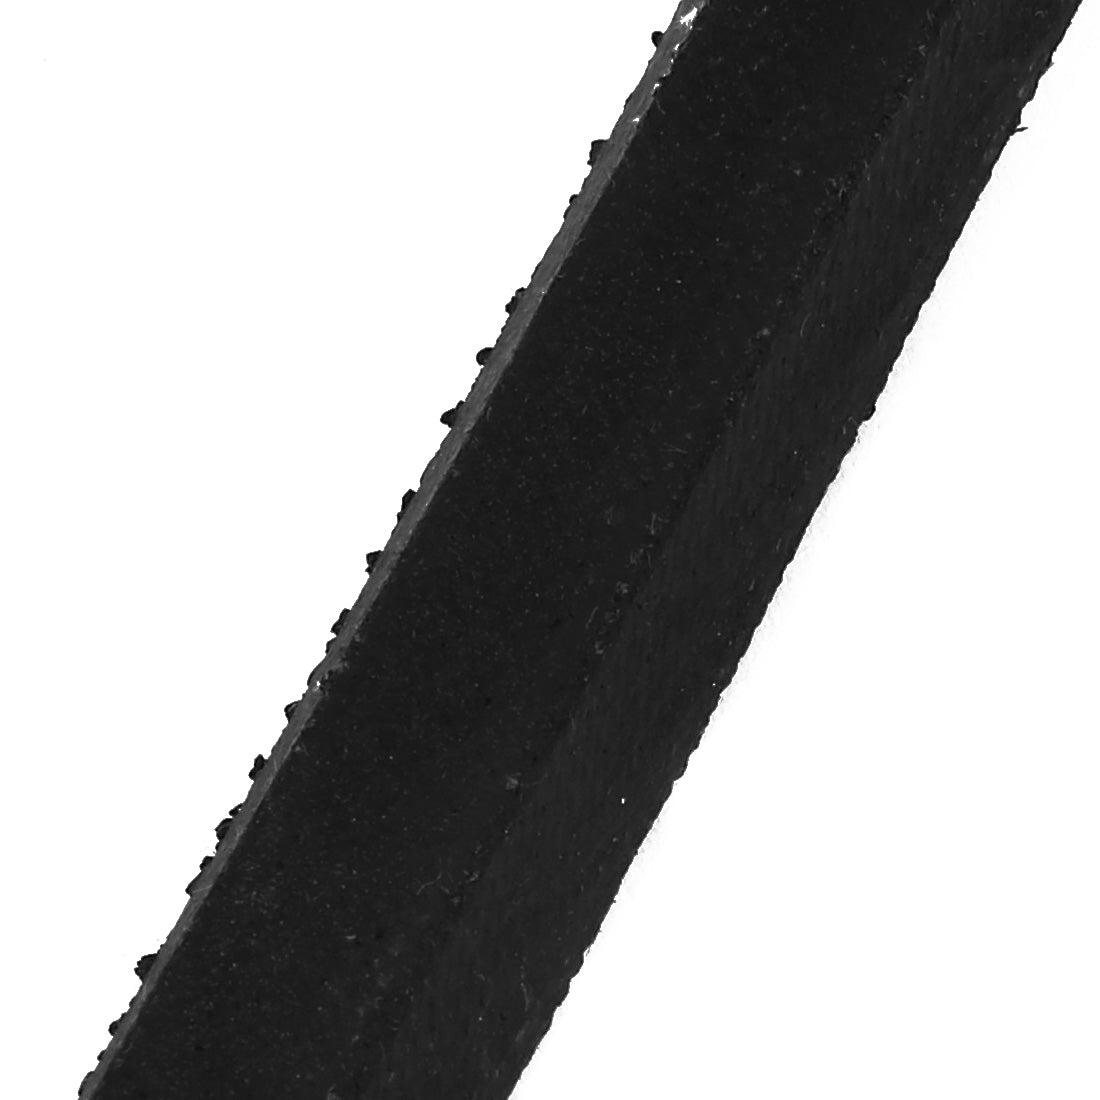 uxcell Uxcell A1092Li 13mm Width 8mm Thickness Rubber High Strength Transmission Drive V-Belt